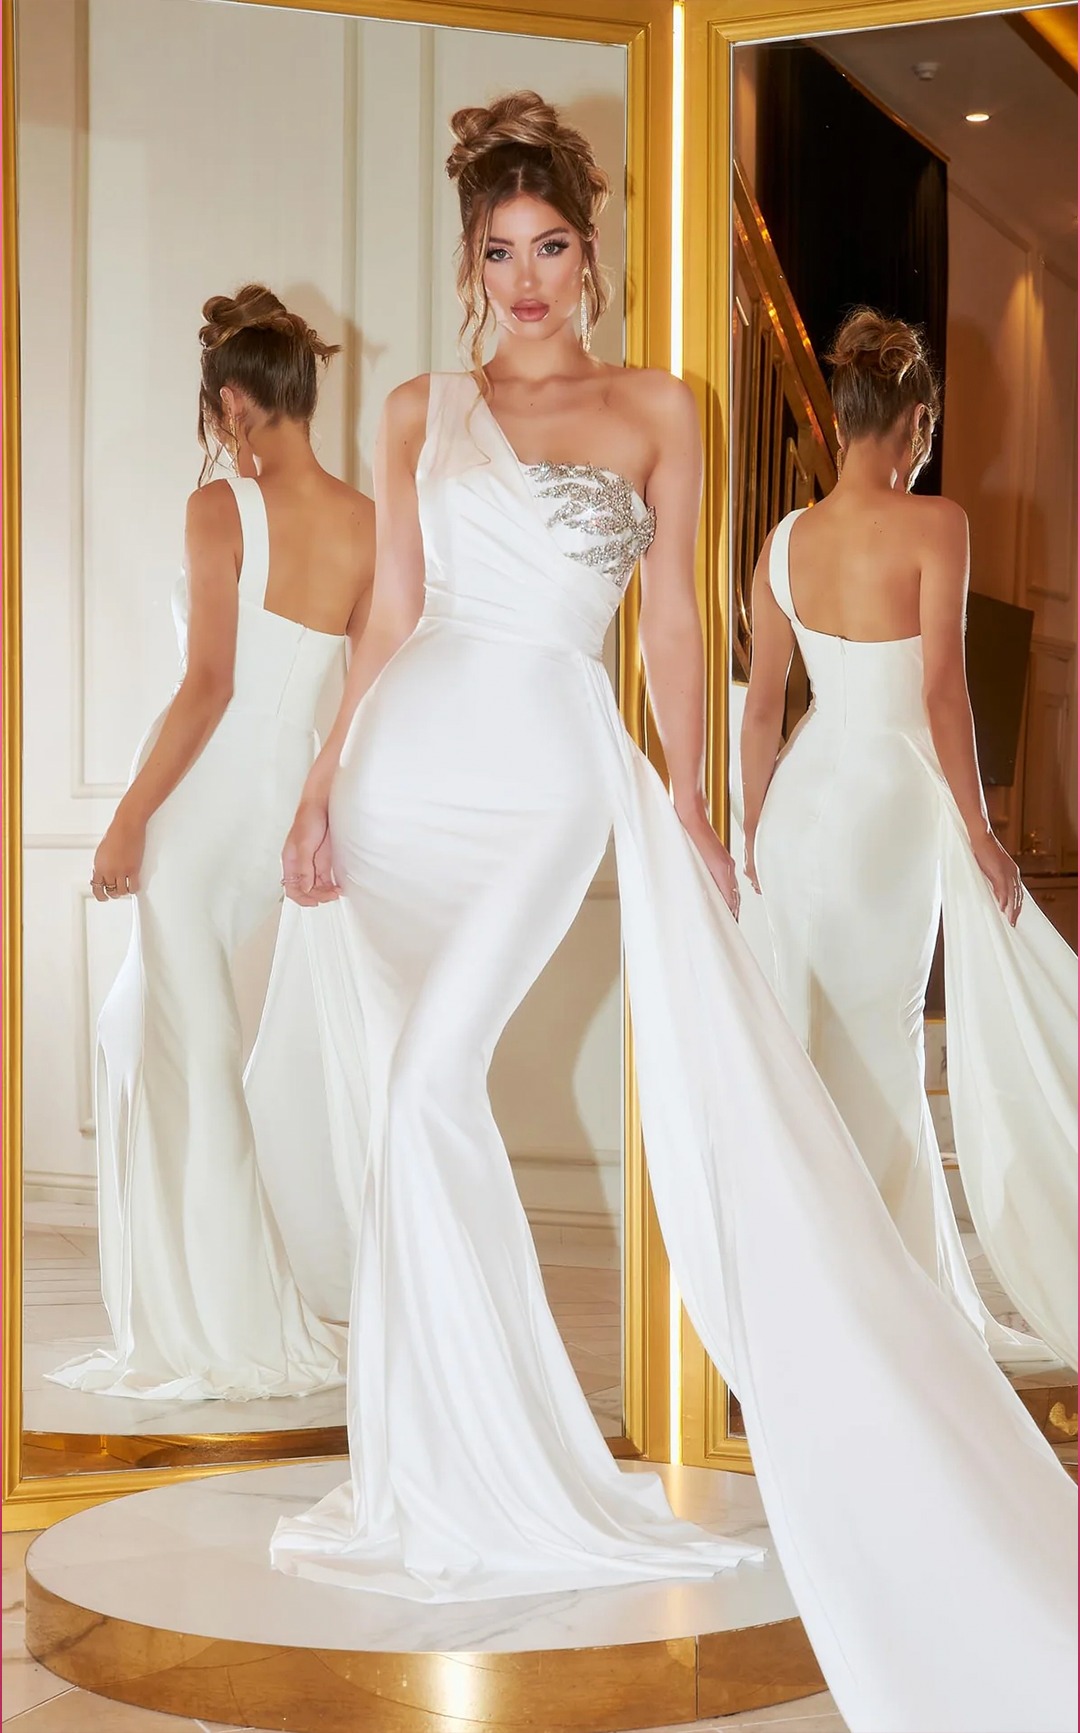 New York Dress - How to select your wedding dress fabric